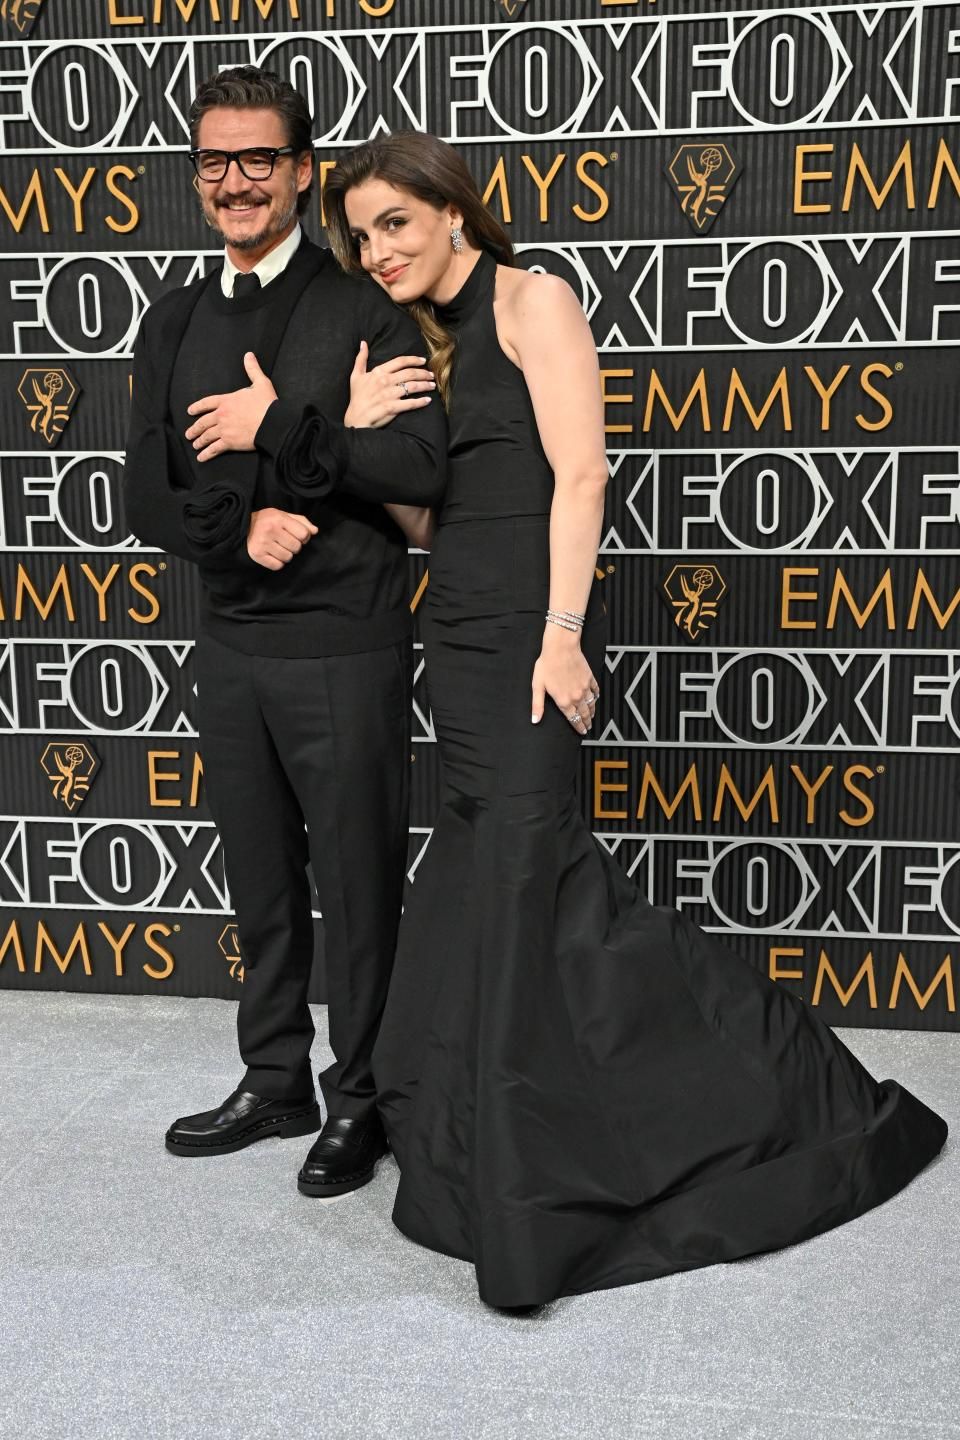 PEDRO PASCAL & LUX PASCAL  EMMYS AWARDS